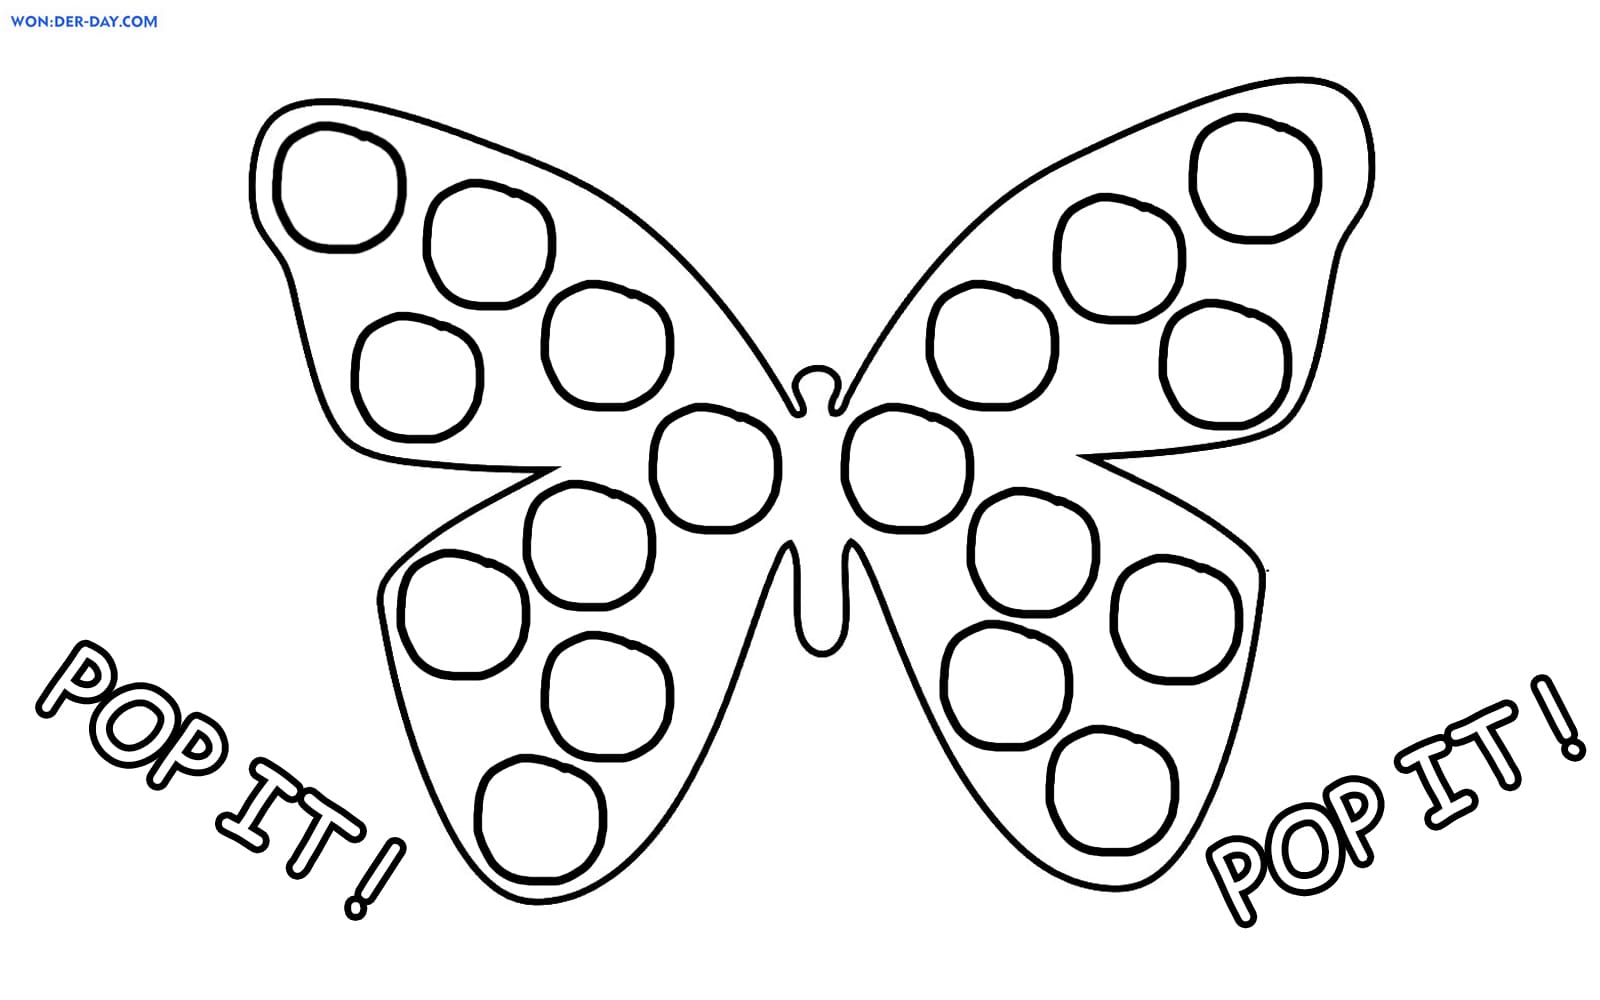 Simple Dimple and Pop It Coloring Pages   Free coloring pages